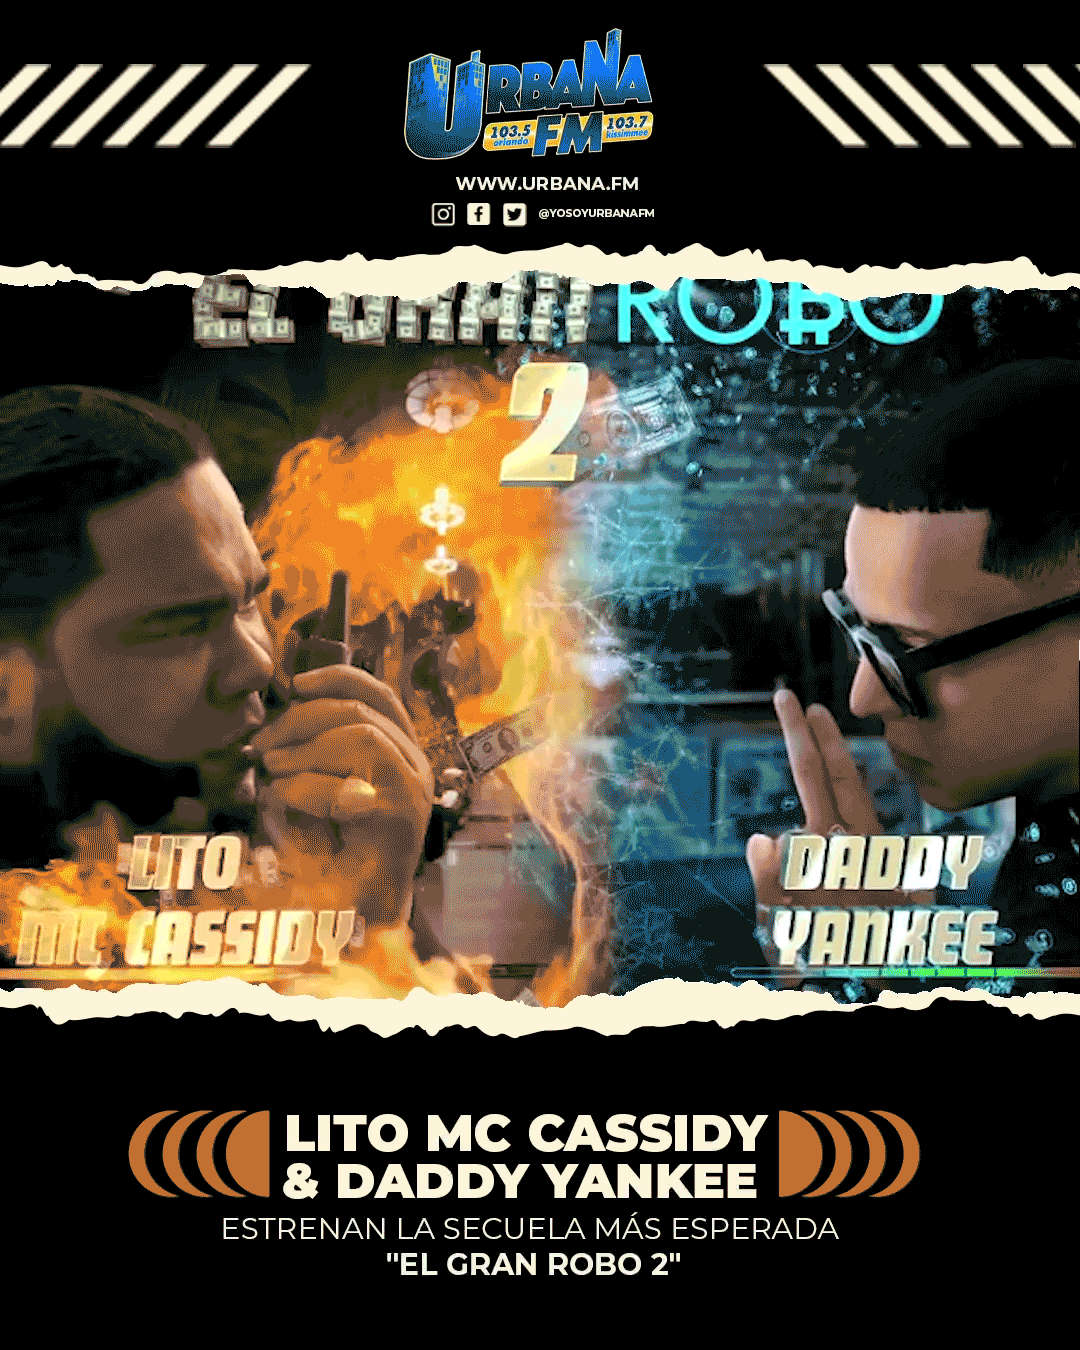 Lito MC Cassidy and Daddy Yankee release "The Great Robbery 2" thumbnail